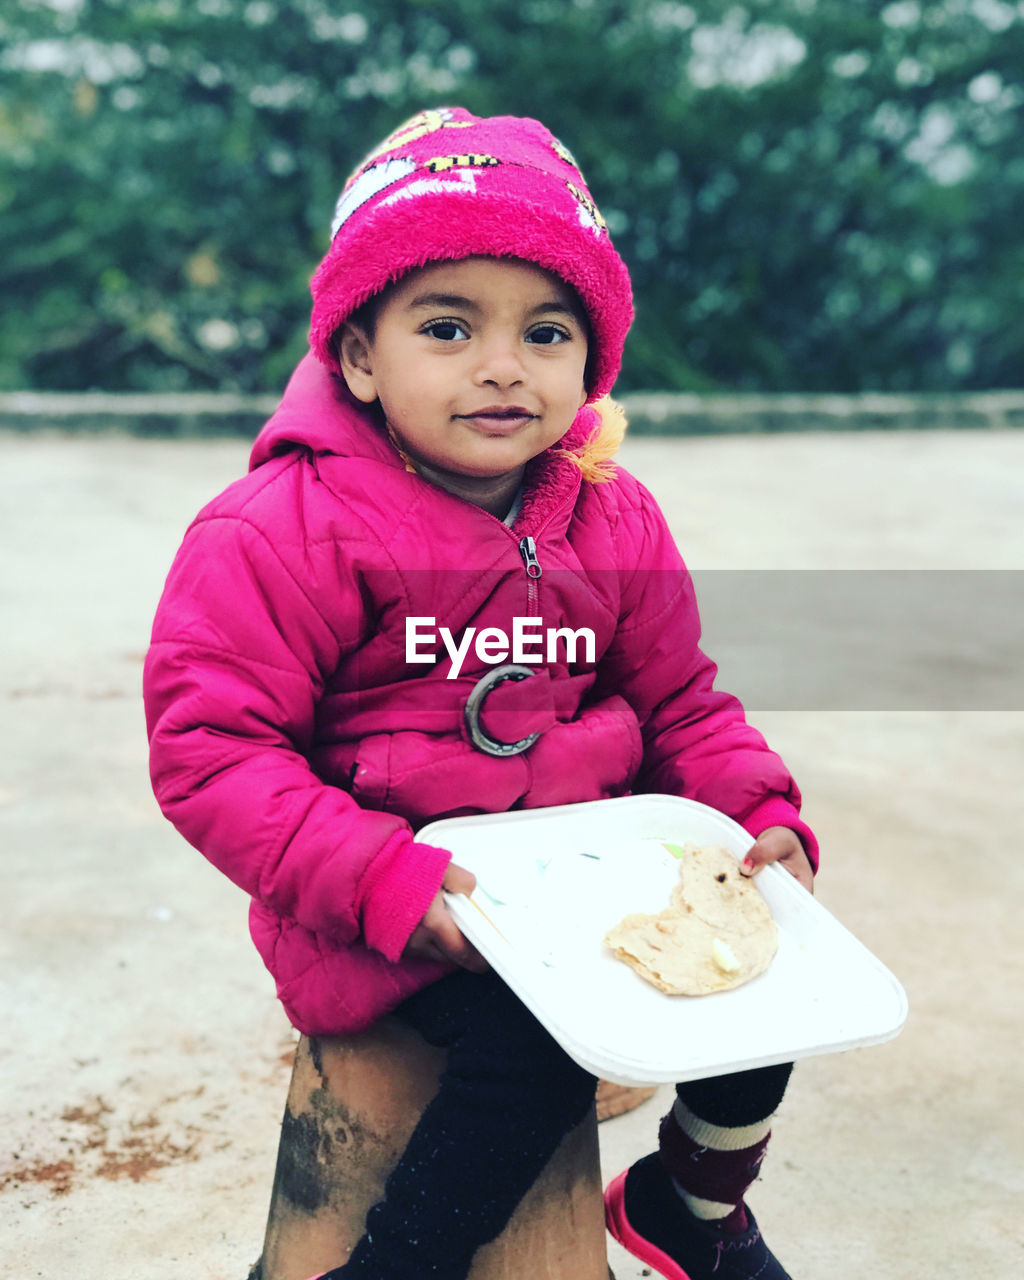 child, childhood, one person, toddler, clothing, portrait, female, food and drink, pink, cute, food, women, looking at camera, spring, hat, person, innocence, day, full length, winter, cap, nature, leisure activity, holding, sweet food, front view, lifestyles, eating, smiling, cold temperature, outdoors, warm clothing, footwear, happiness, emotion, baby, casual clothing, focus on foreground, knit hat, sweet